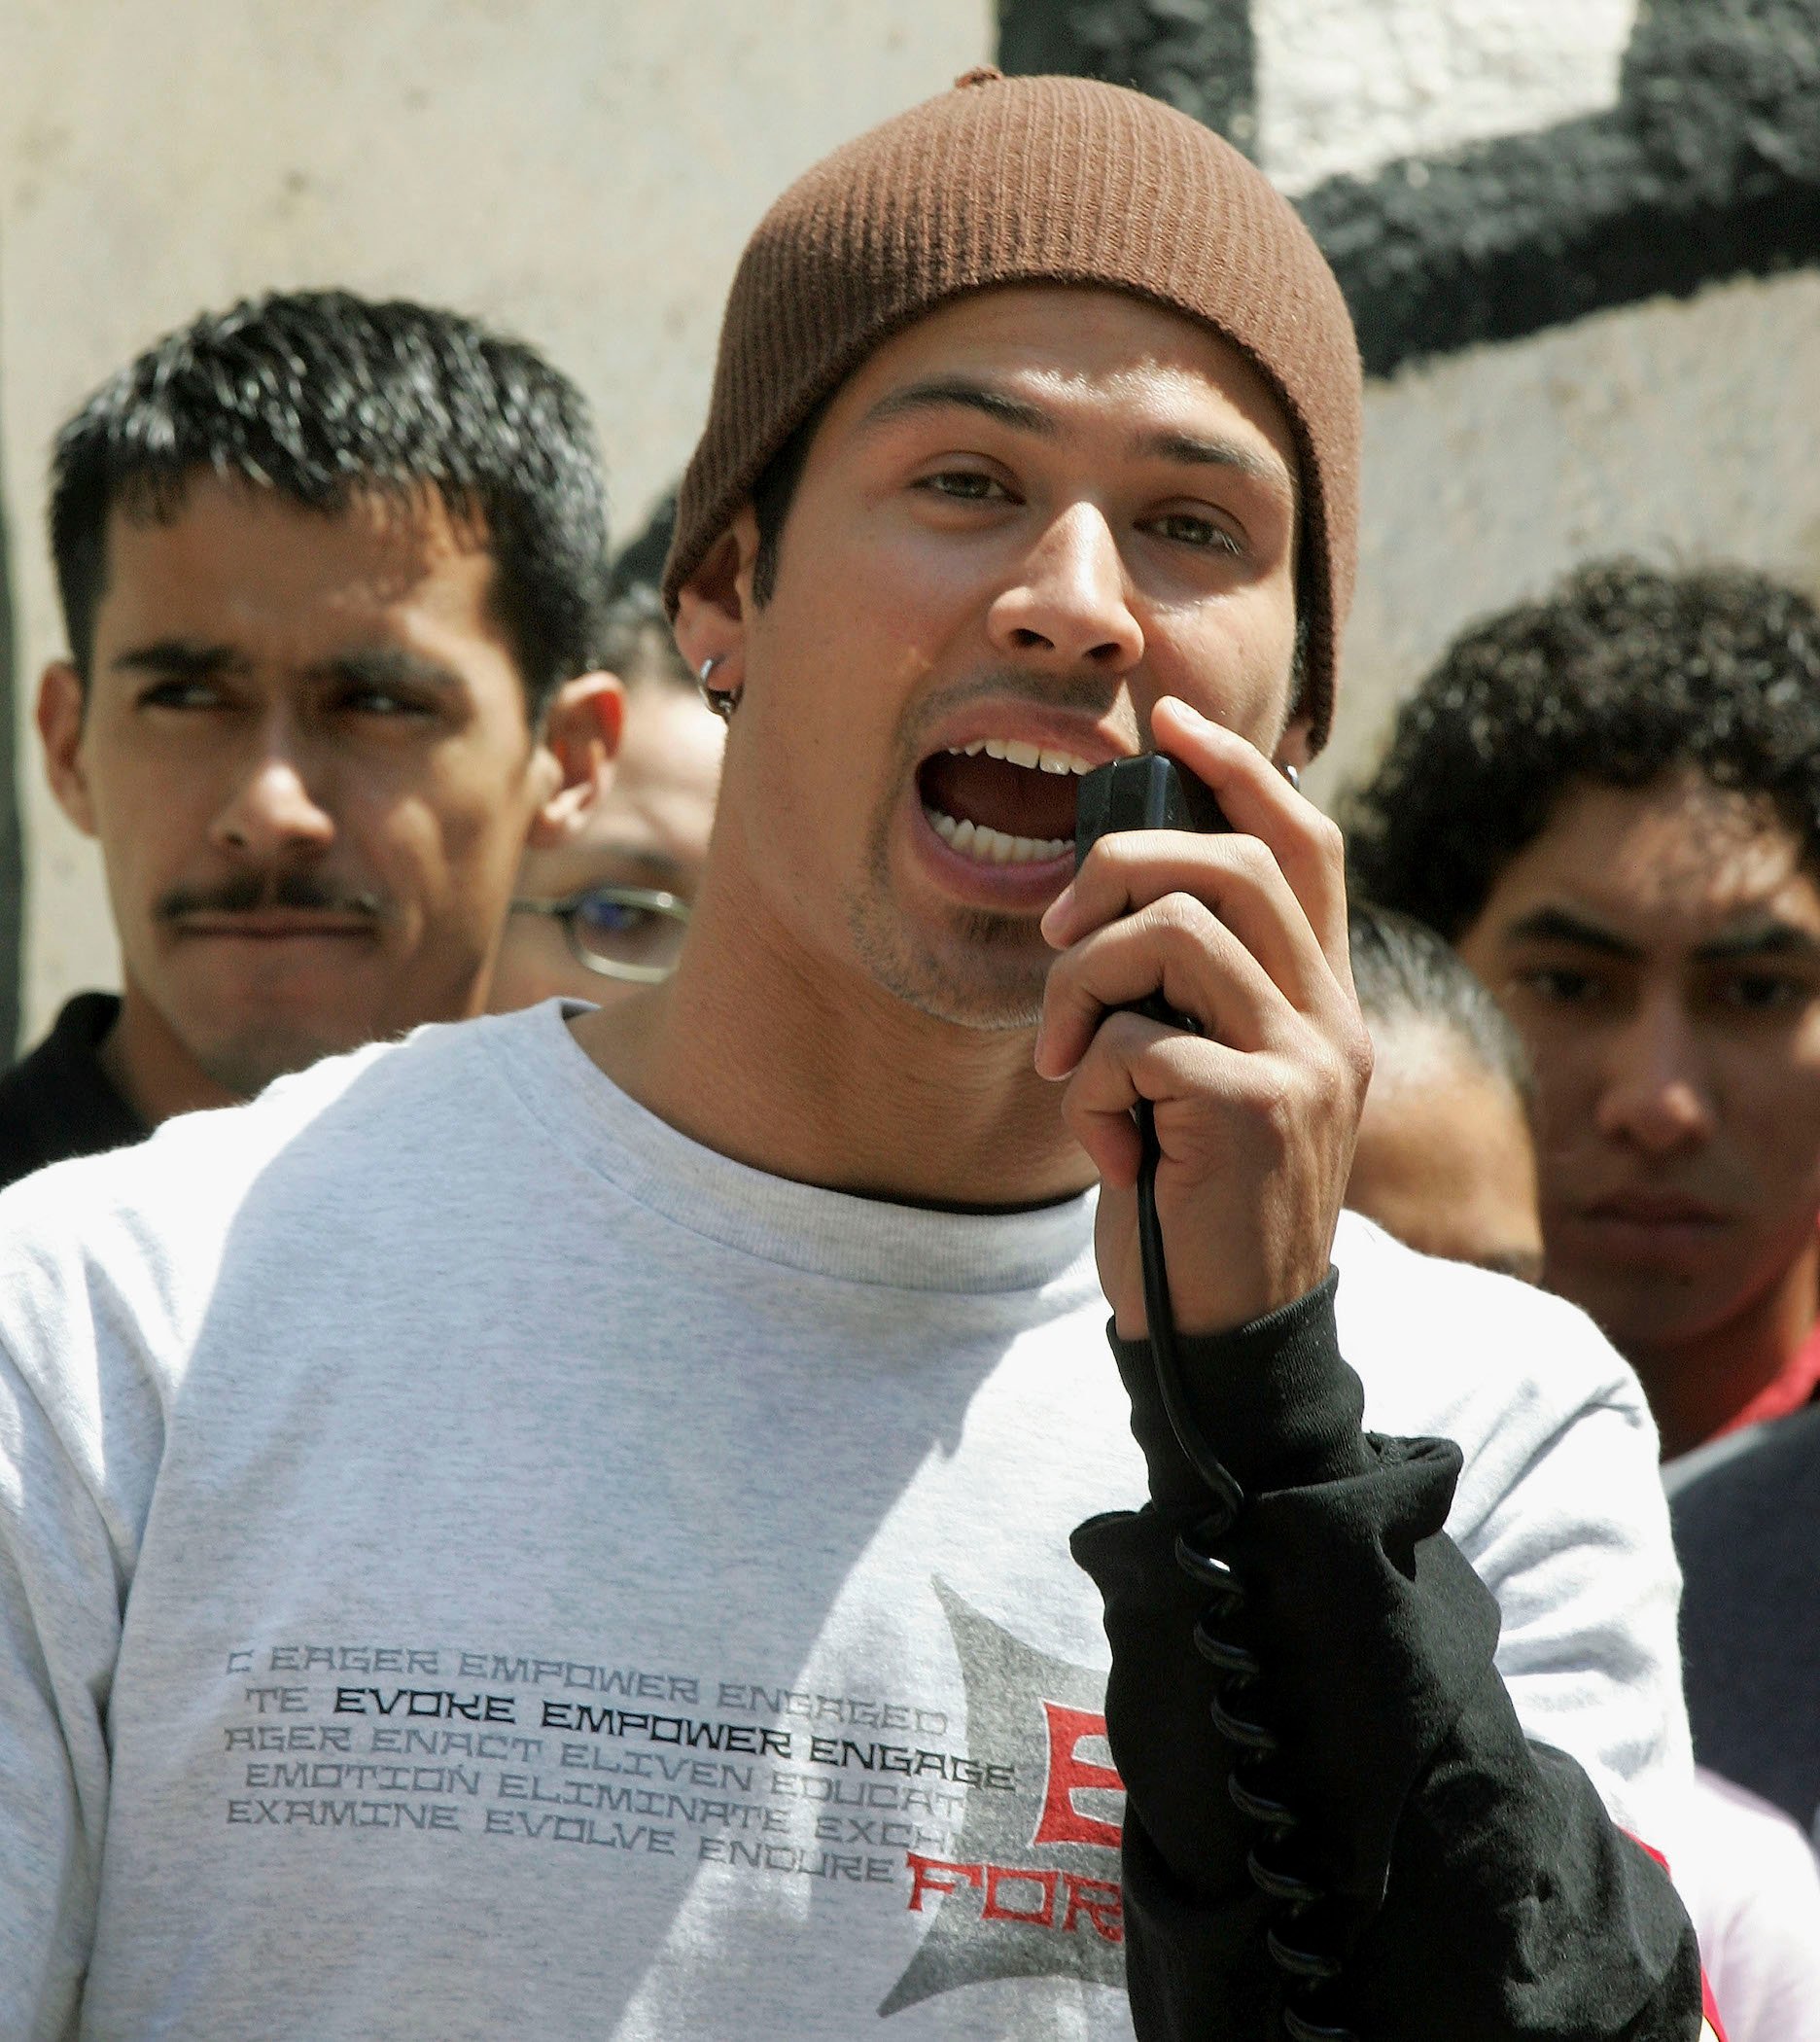 MTV's 'The Challenge' star Yes Duffy speaks during a 'Rally Against Tobacco' in 2005